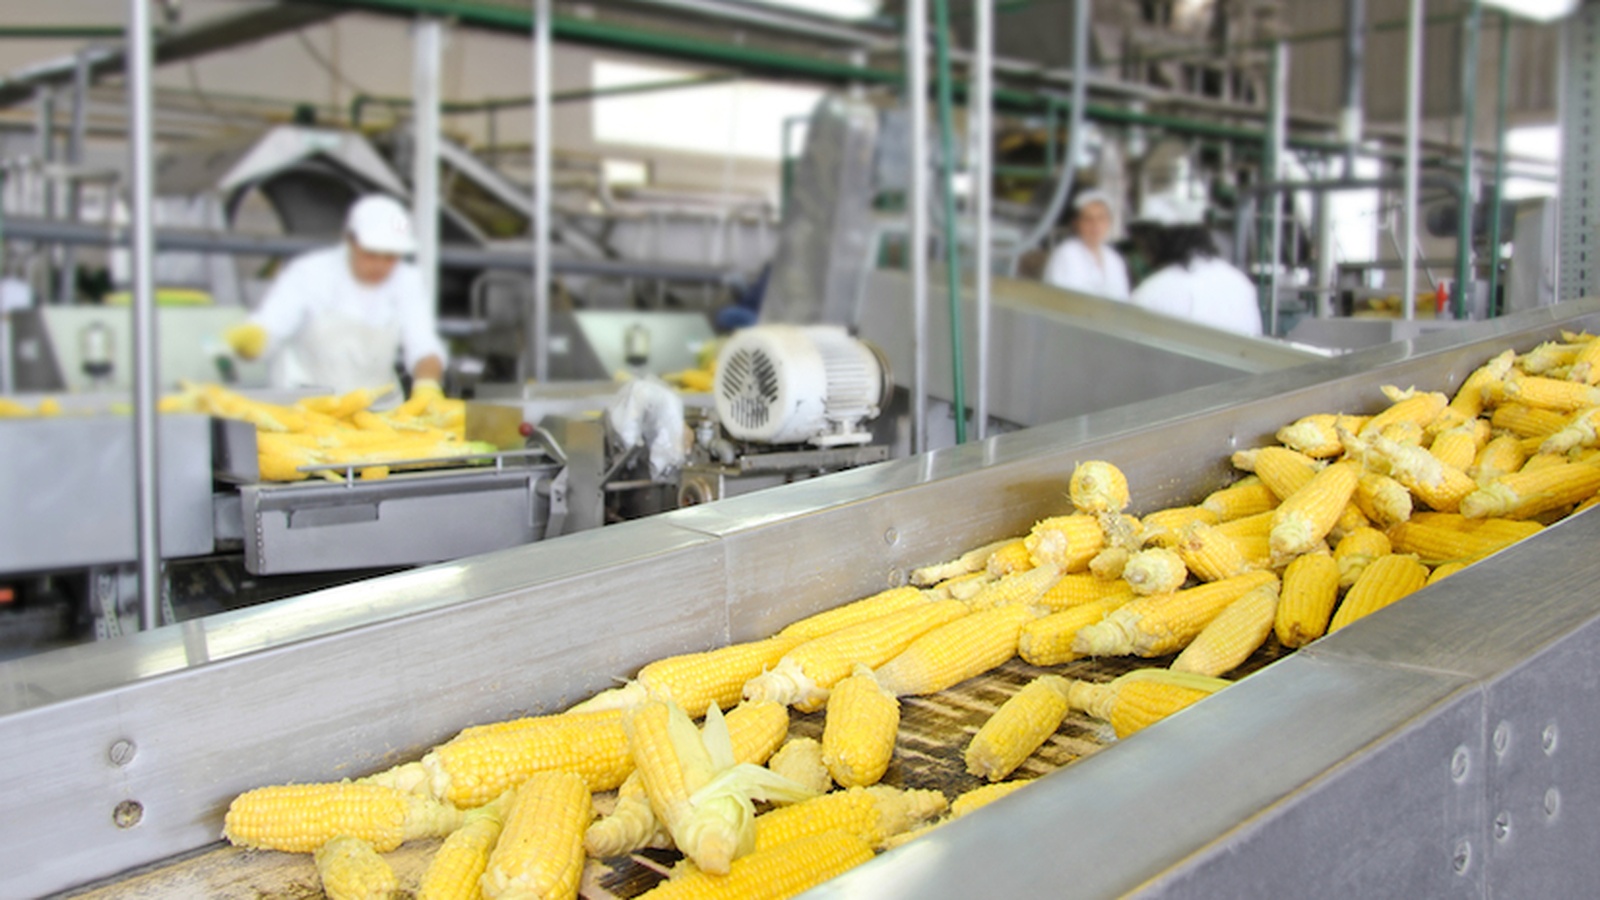 In Summary: 10 Steps to ensure food safety